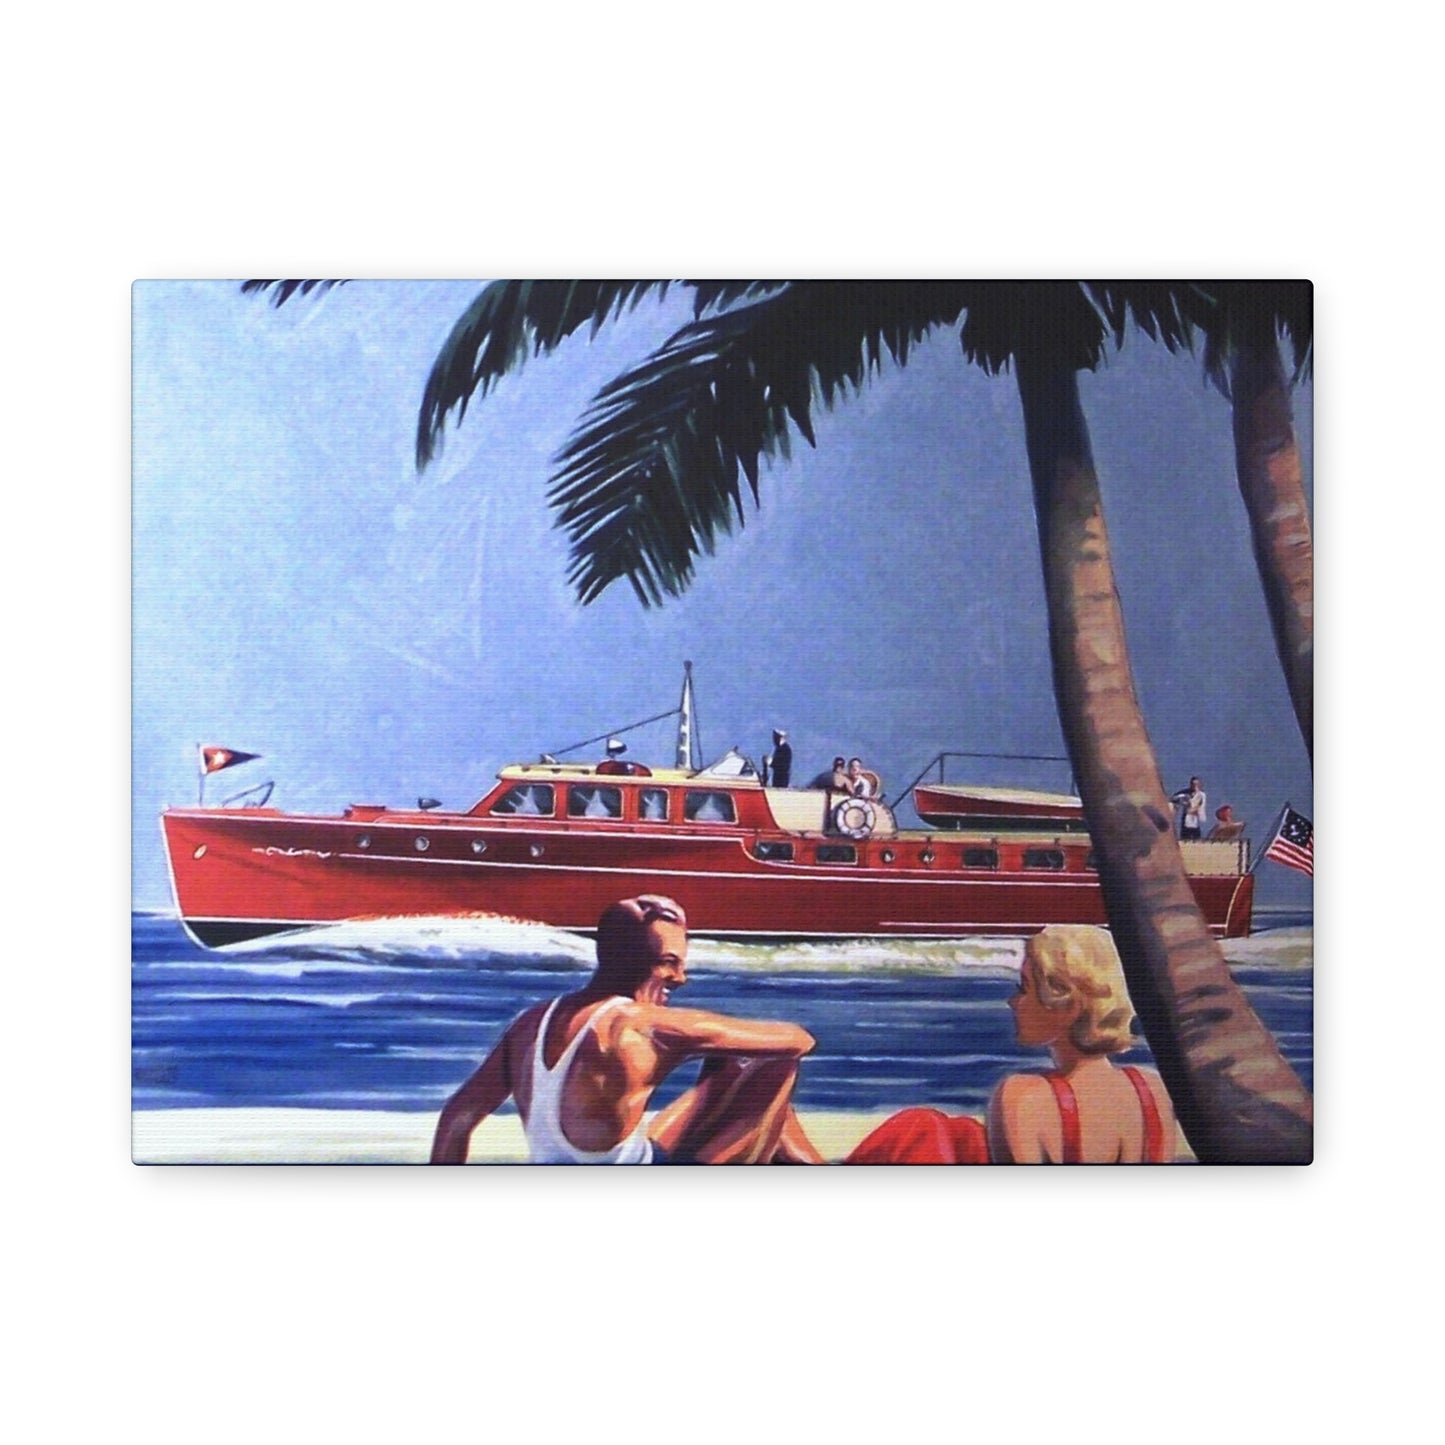  Illustration of an elegant red yacht passing by a tropical beach